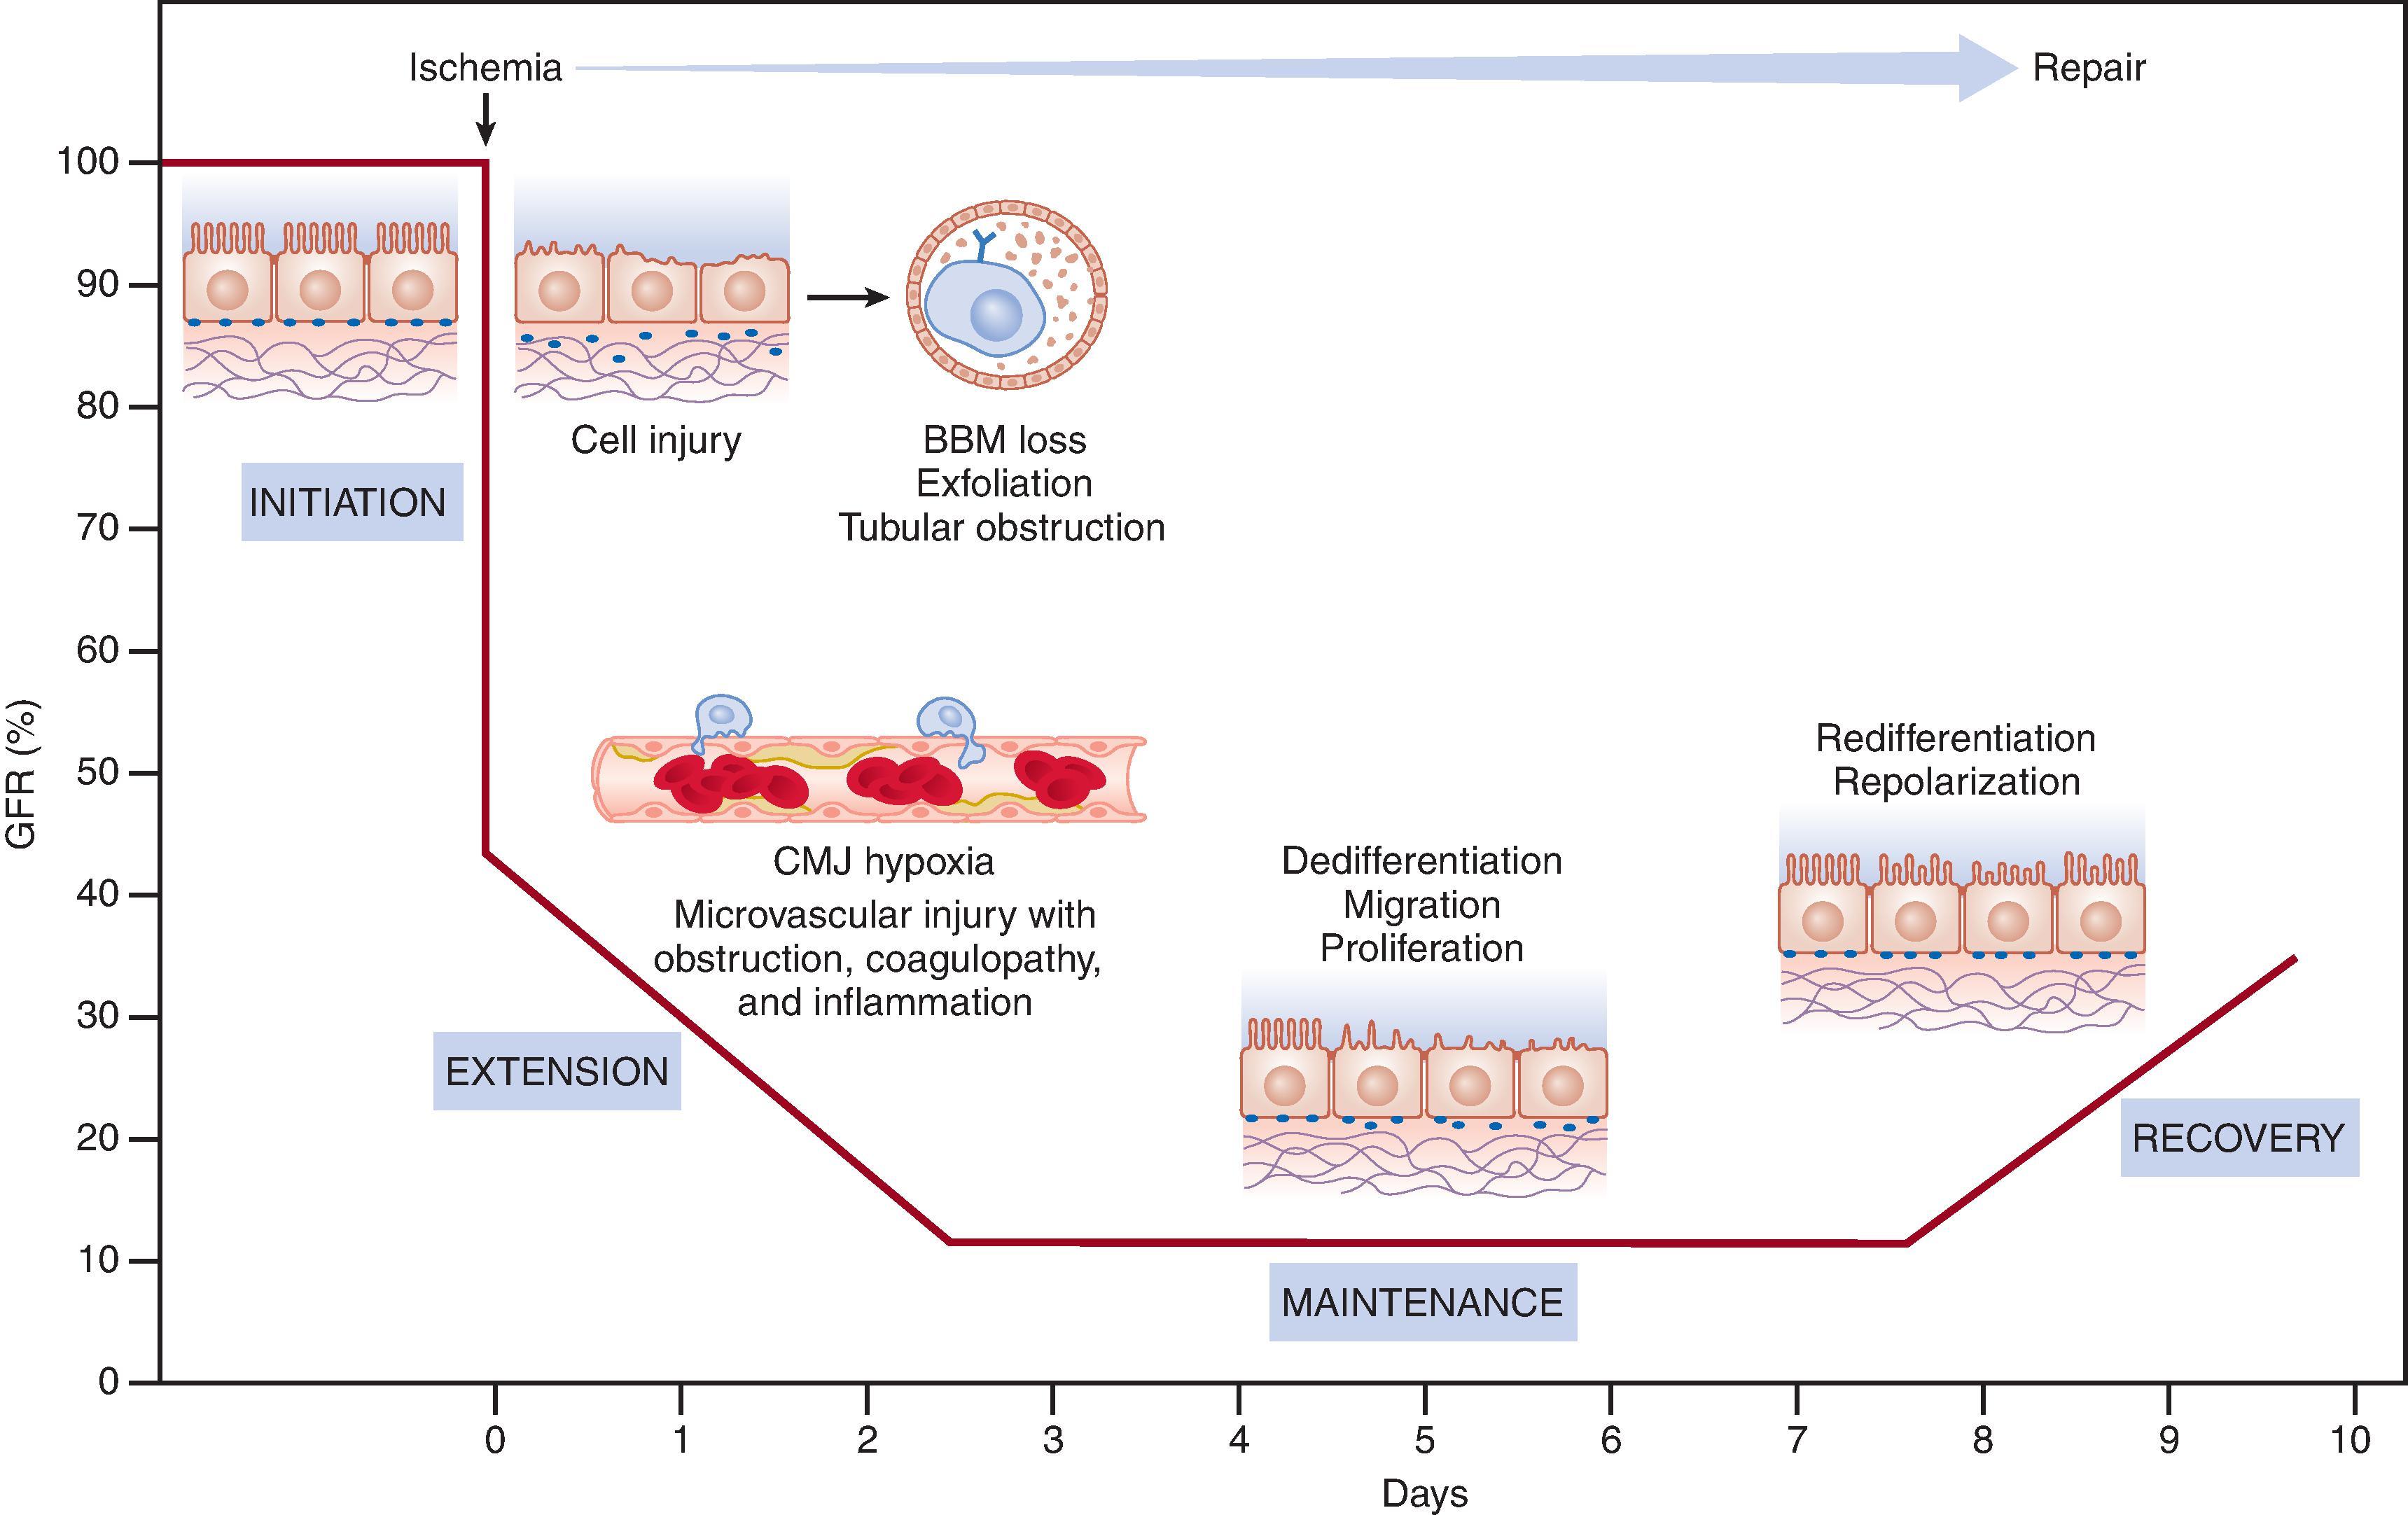 Fig. 31.2, Relationship between the clinical phases and the cellular phases of ischemic acute kidney injury (AKI) and the temporal impact on organ function as represented by glomerular filtration rate (GFR). A variety of cellular and vascular events are involved in the development of AKI. The initiation phase occurs when a reduction in kidney blood flow results in cellular injury, particularly the renal tubular epithelial cells, and a decline in GFR. Vascular and inflammatory processes that contribute to further cell injury and further decline in GFR usher in the extension phase. During the maintenance phase, GFR reaches a stable nadir as cellular repair processes are initiated to maintain and reestablish organ integrity. The recovery phase is marked by a return of normal cell and organ function that results in an improvement in GFR. BBM, Brush border membrane; CMJ, corticomedullary junction. (Data from Basile DP, Anderson MD, Sutton TA. Pathophysiology of acute kidney injury. Compr Physiol . 2012;2:1303–1353.)